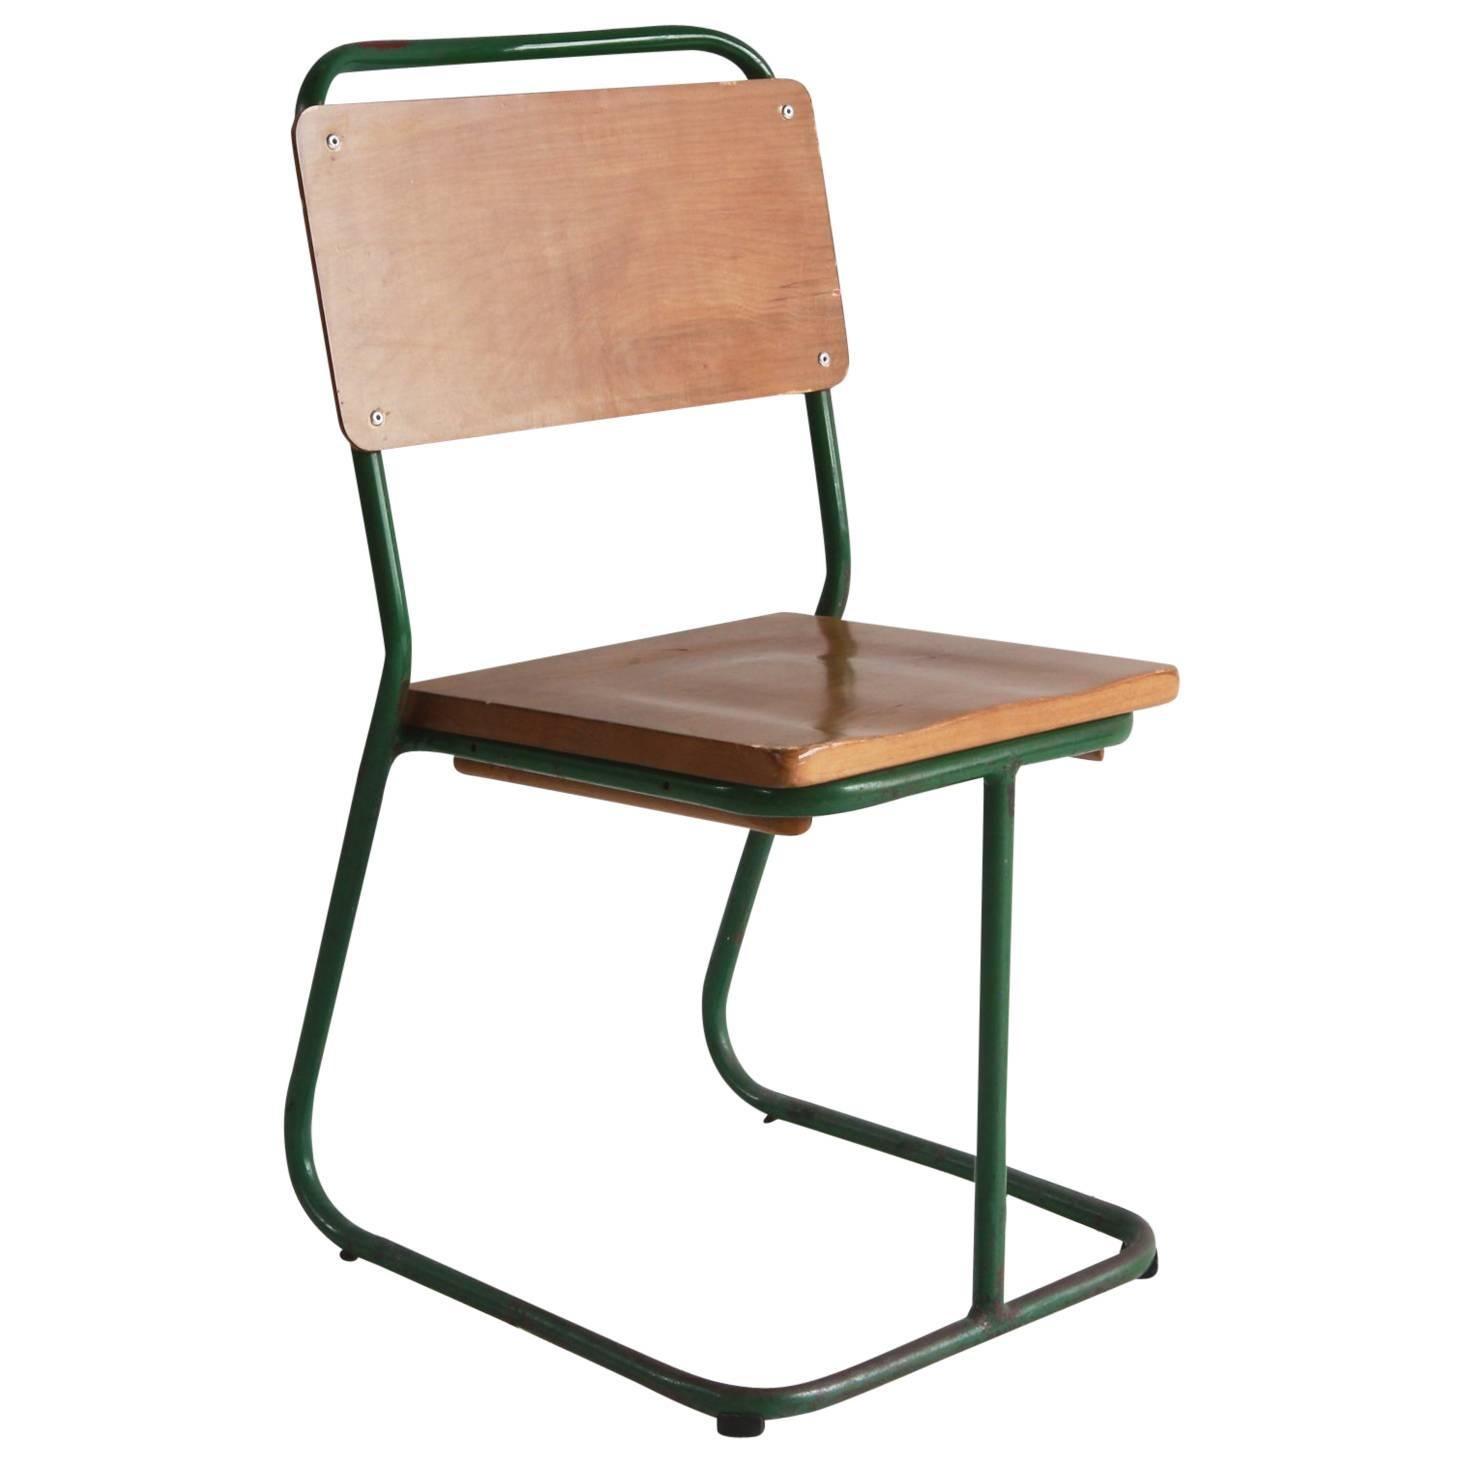 Prouve Style Green Painted Metal Chair with Wood Seat and Back